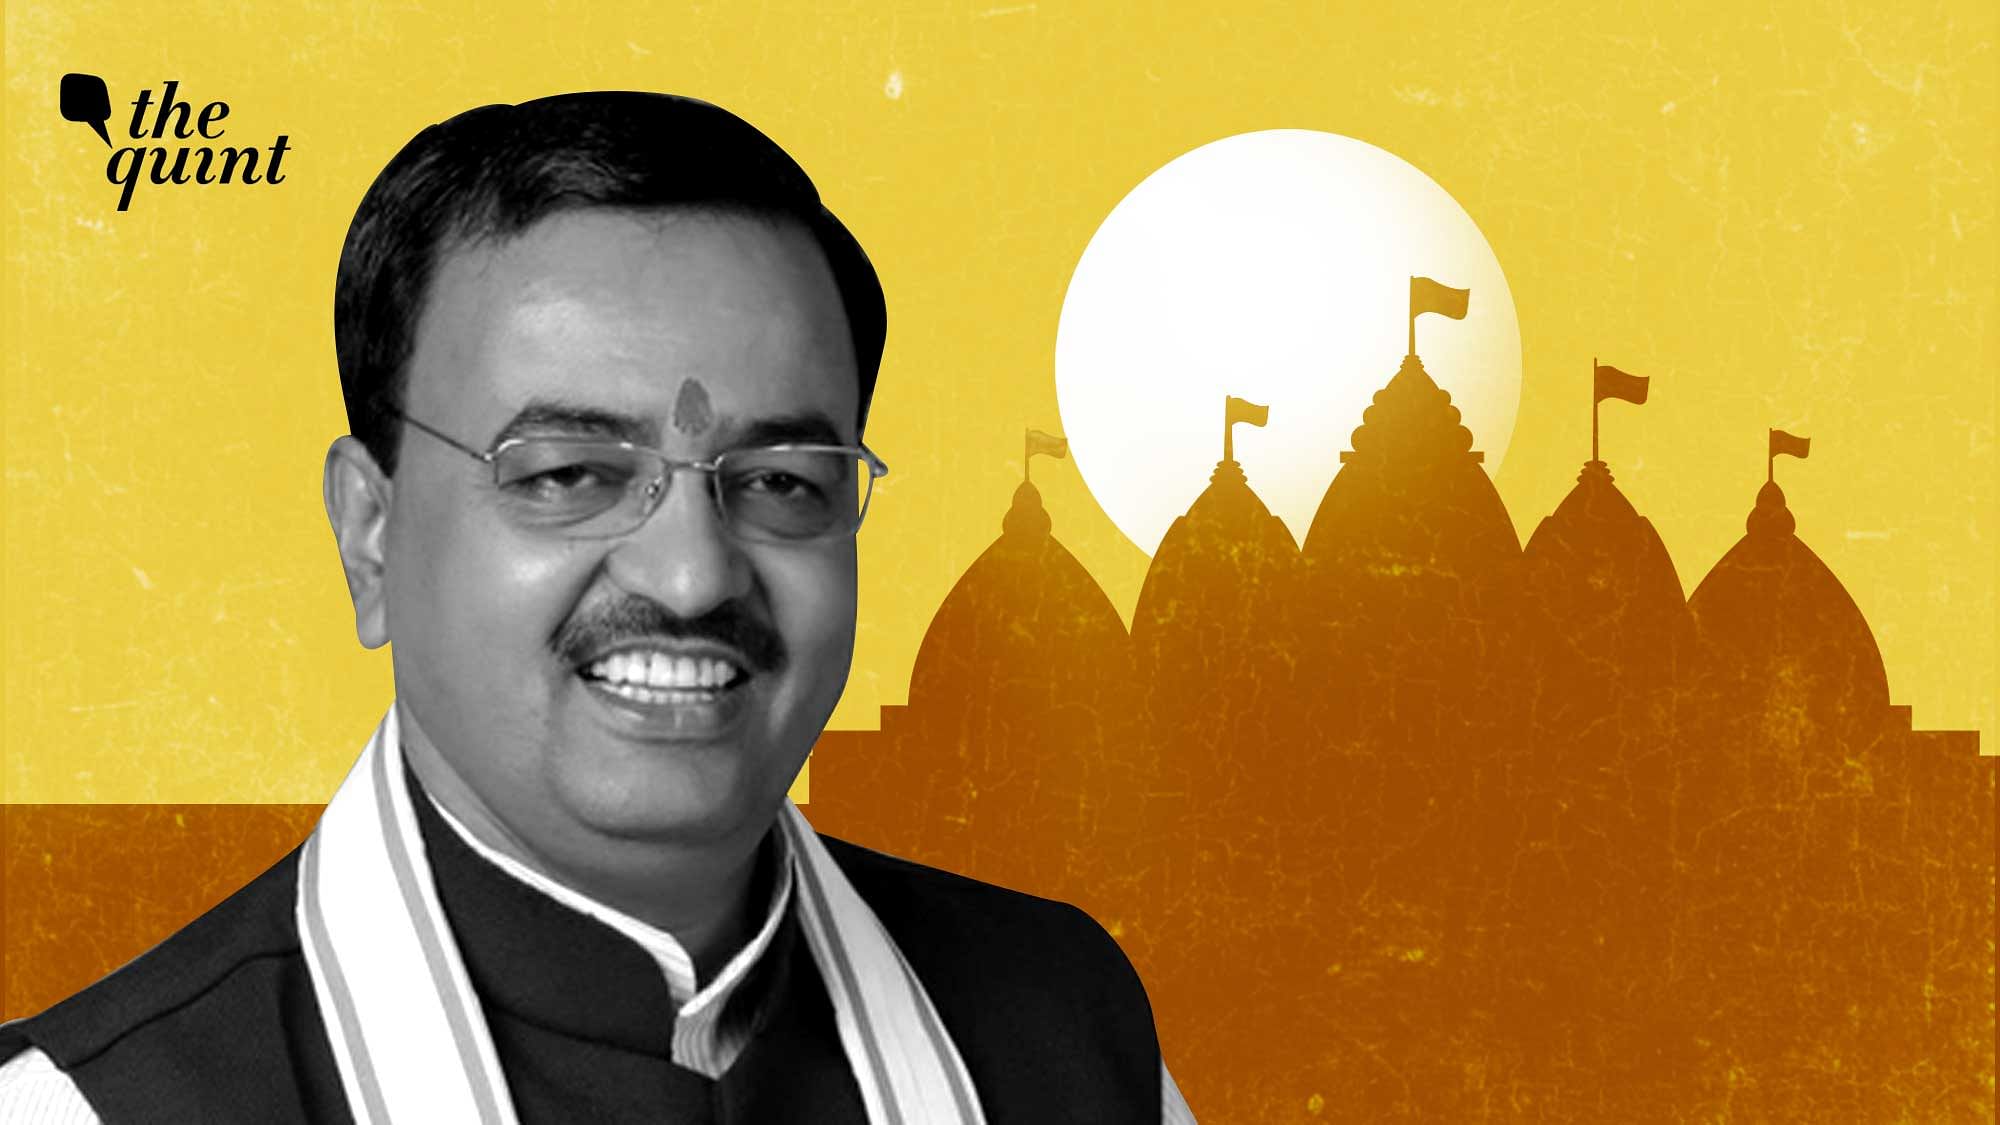 <div class="paragraphs"><p>Uttar Pradesh Deputy Chief Minister, Keshav Prasad Maurya, stirred a controversy in poll-bound Uttar Pradesh by tweeting that preparations were underway for constructing a grand temple in Mathura on the lines of Ayodhya and Varanasi.</p></div>